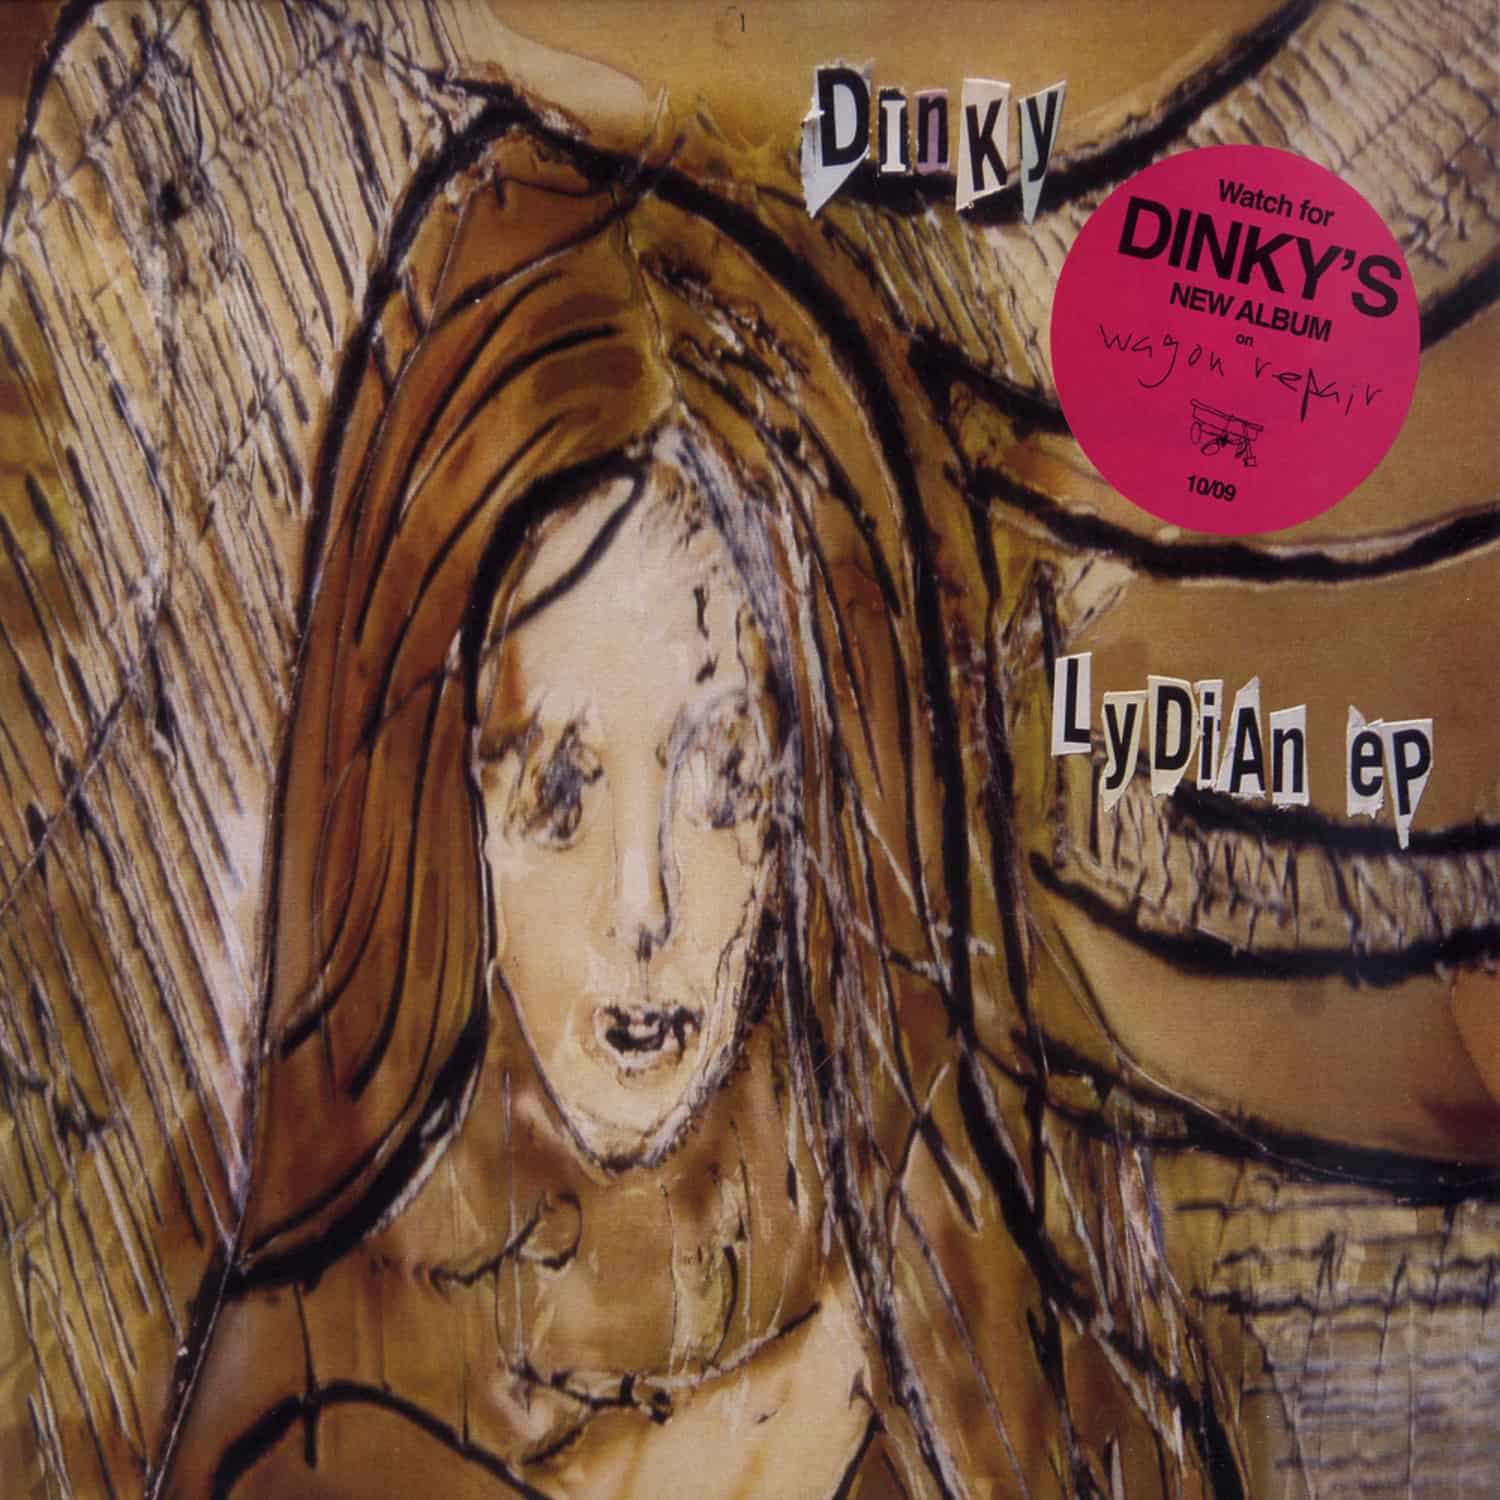 Dinky - LYDIAN EP